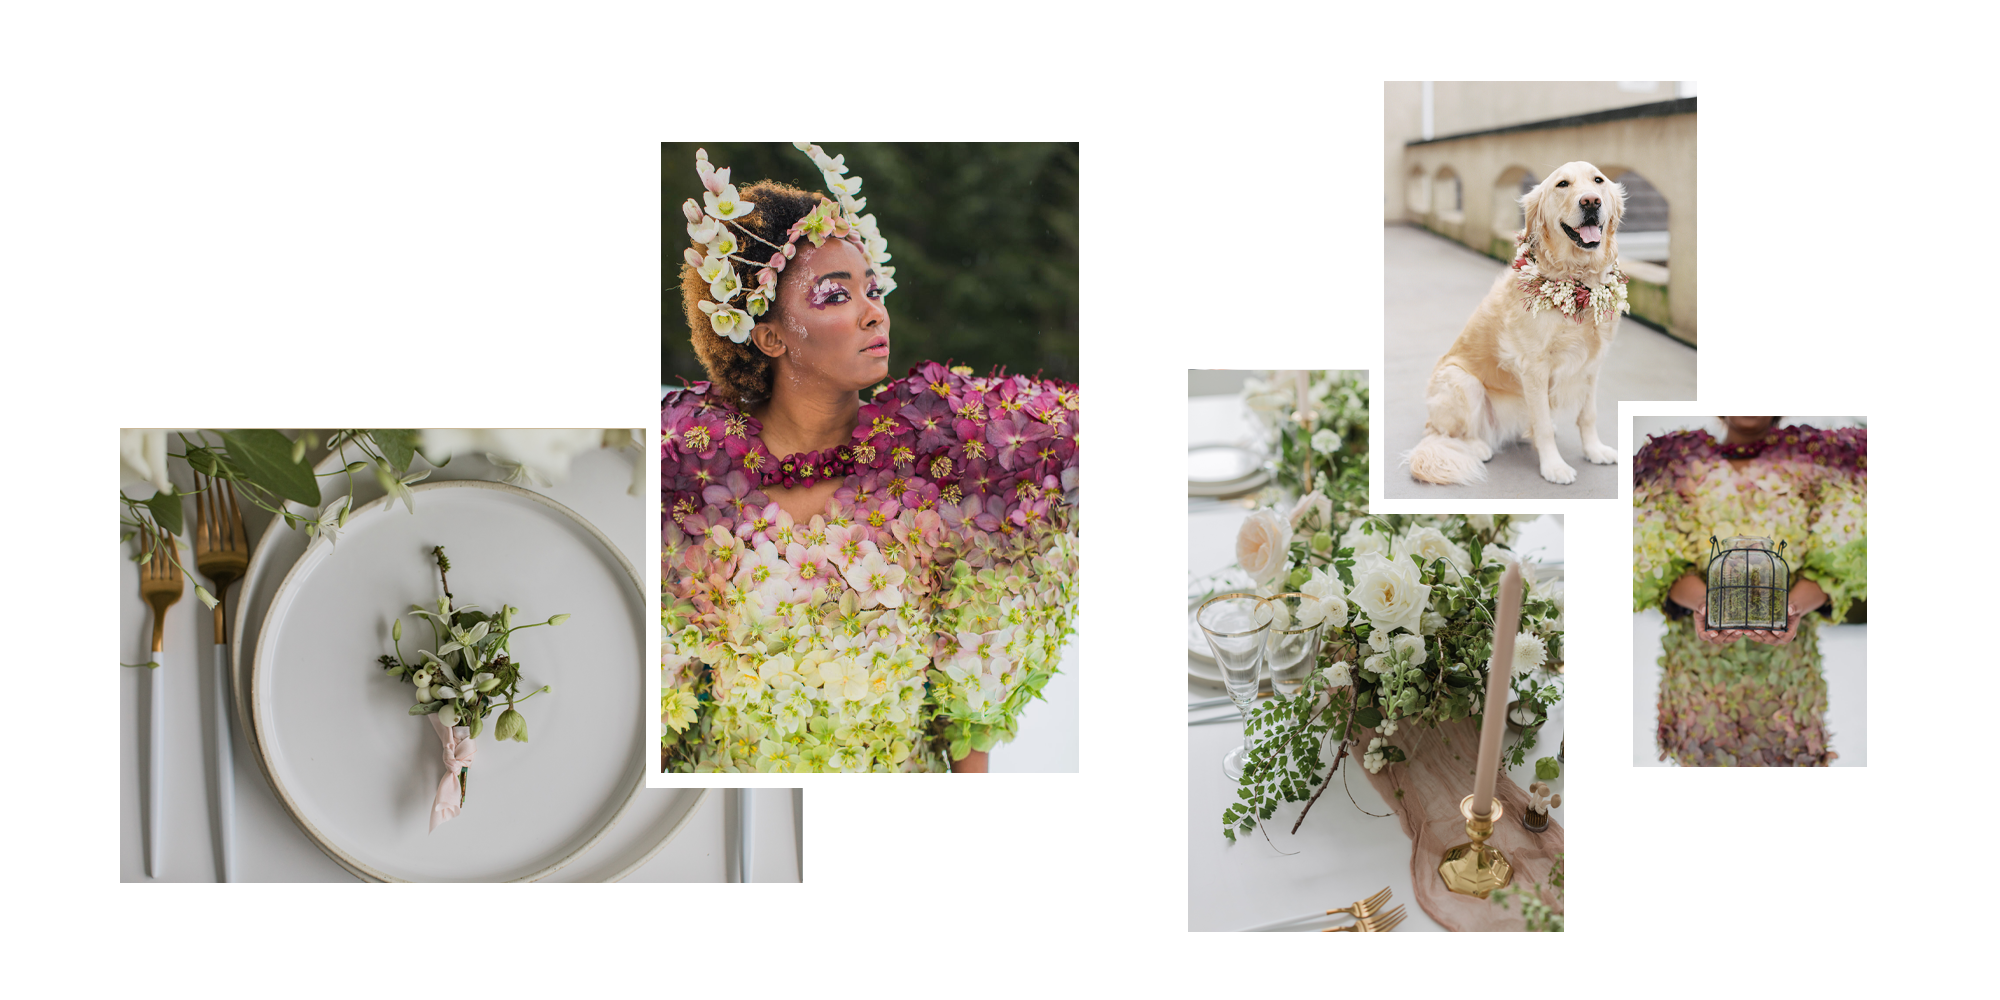 Collage of images of Bloom Poet Floral Design including a flower dress, place setting, flower collar for a dog, and a wedding centerpiece